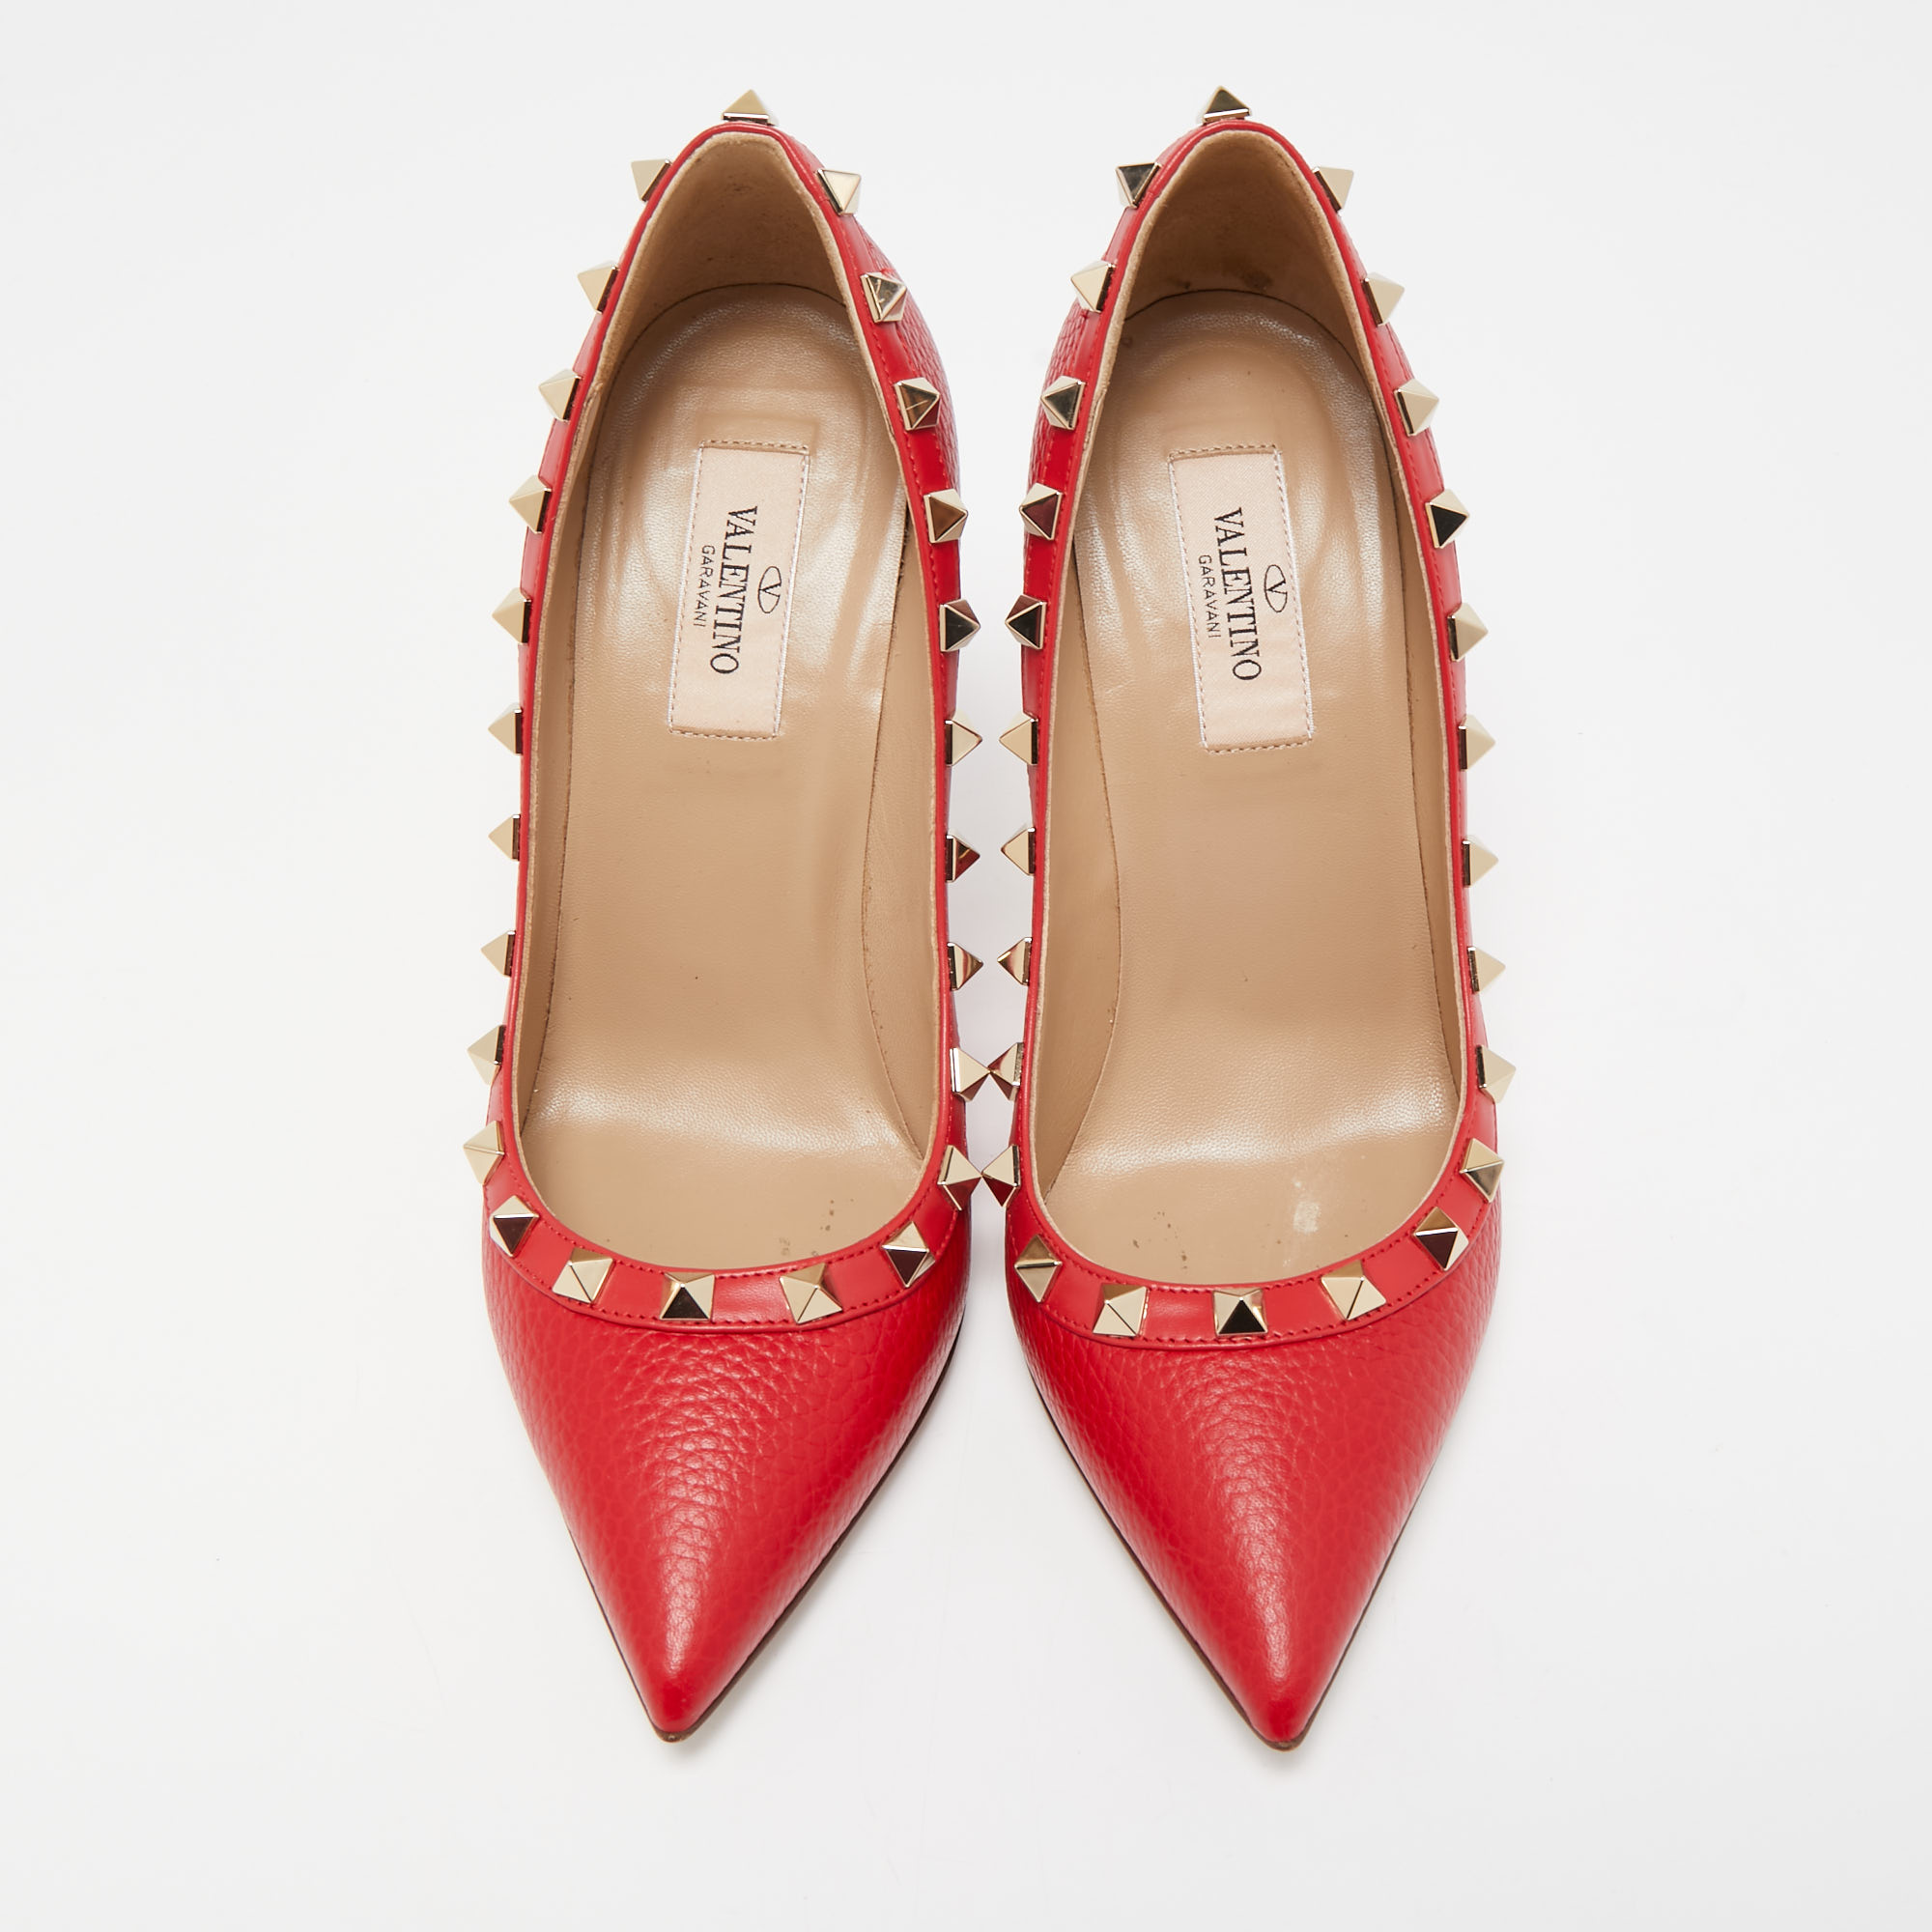 Valentino Red Leather Rockstud Pumps Size 36